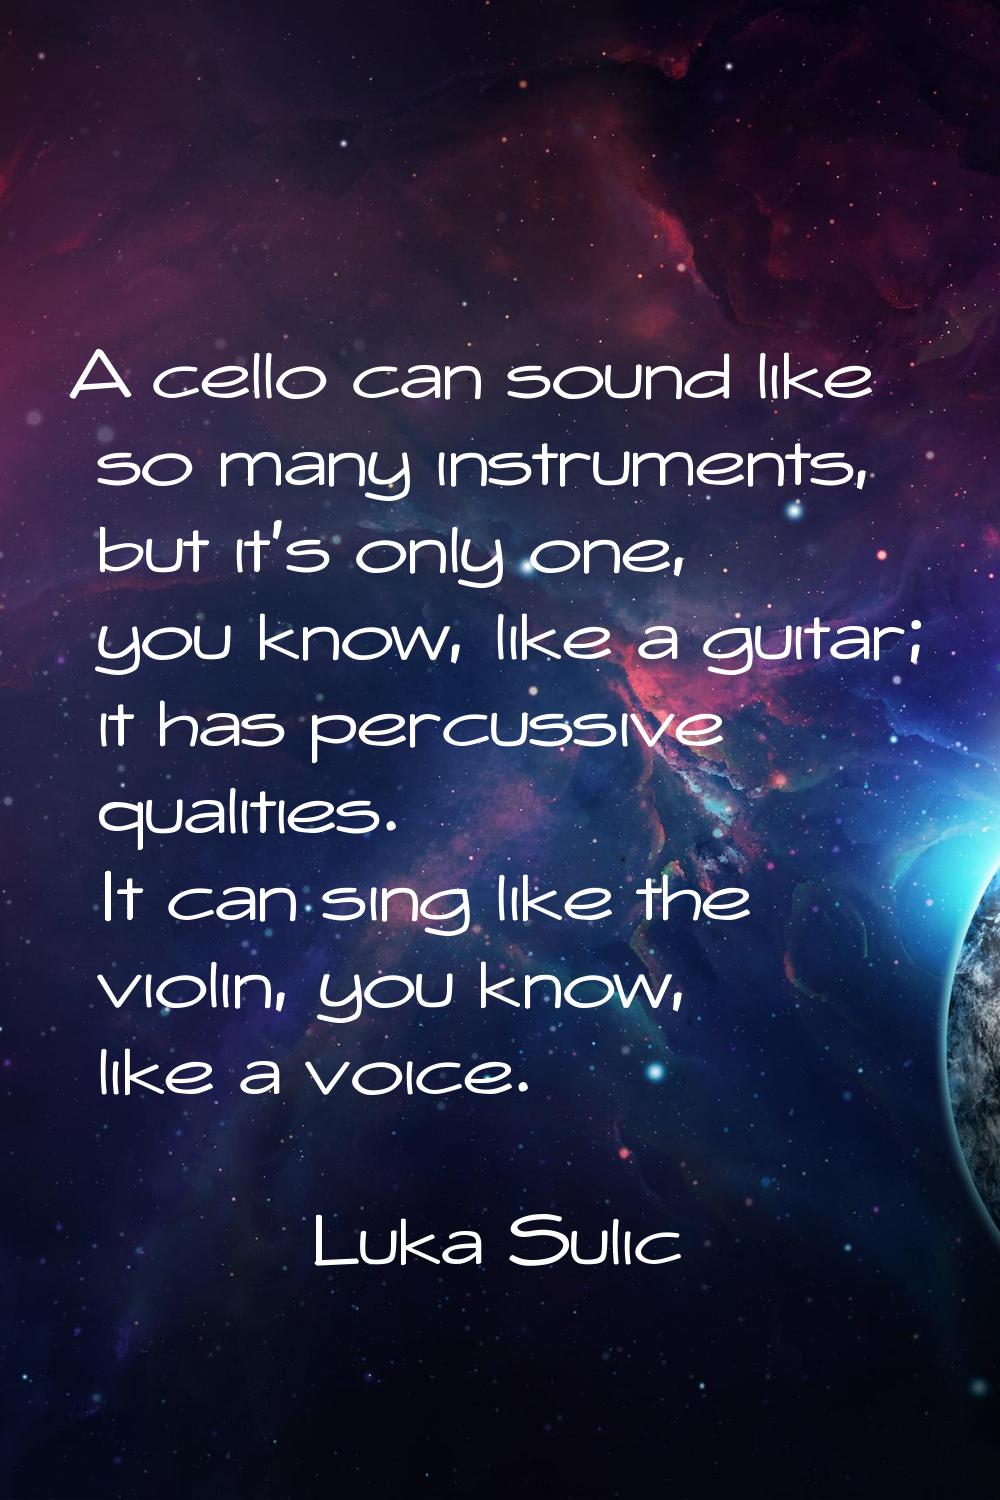 A cello can sound like so many instruments, but it's only one, you know, like a guitar; it has perc